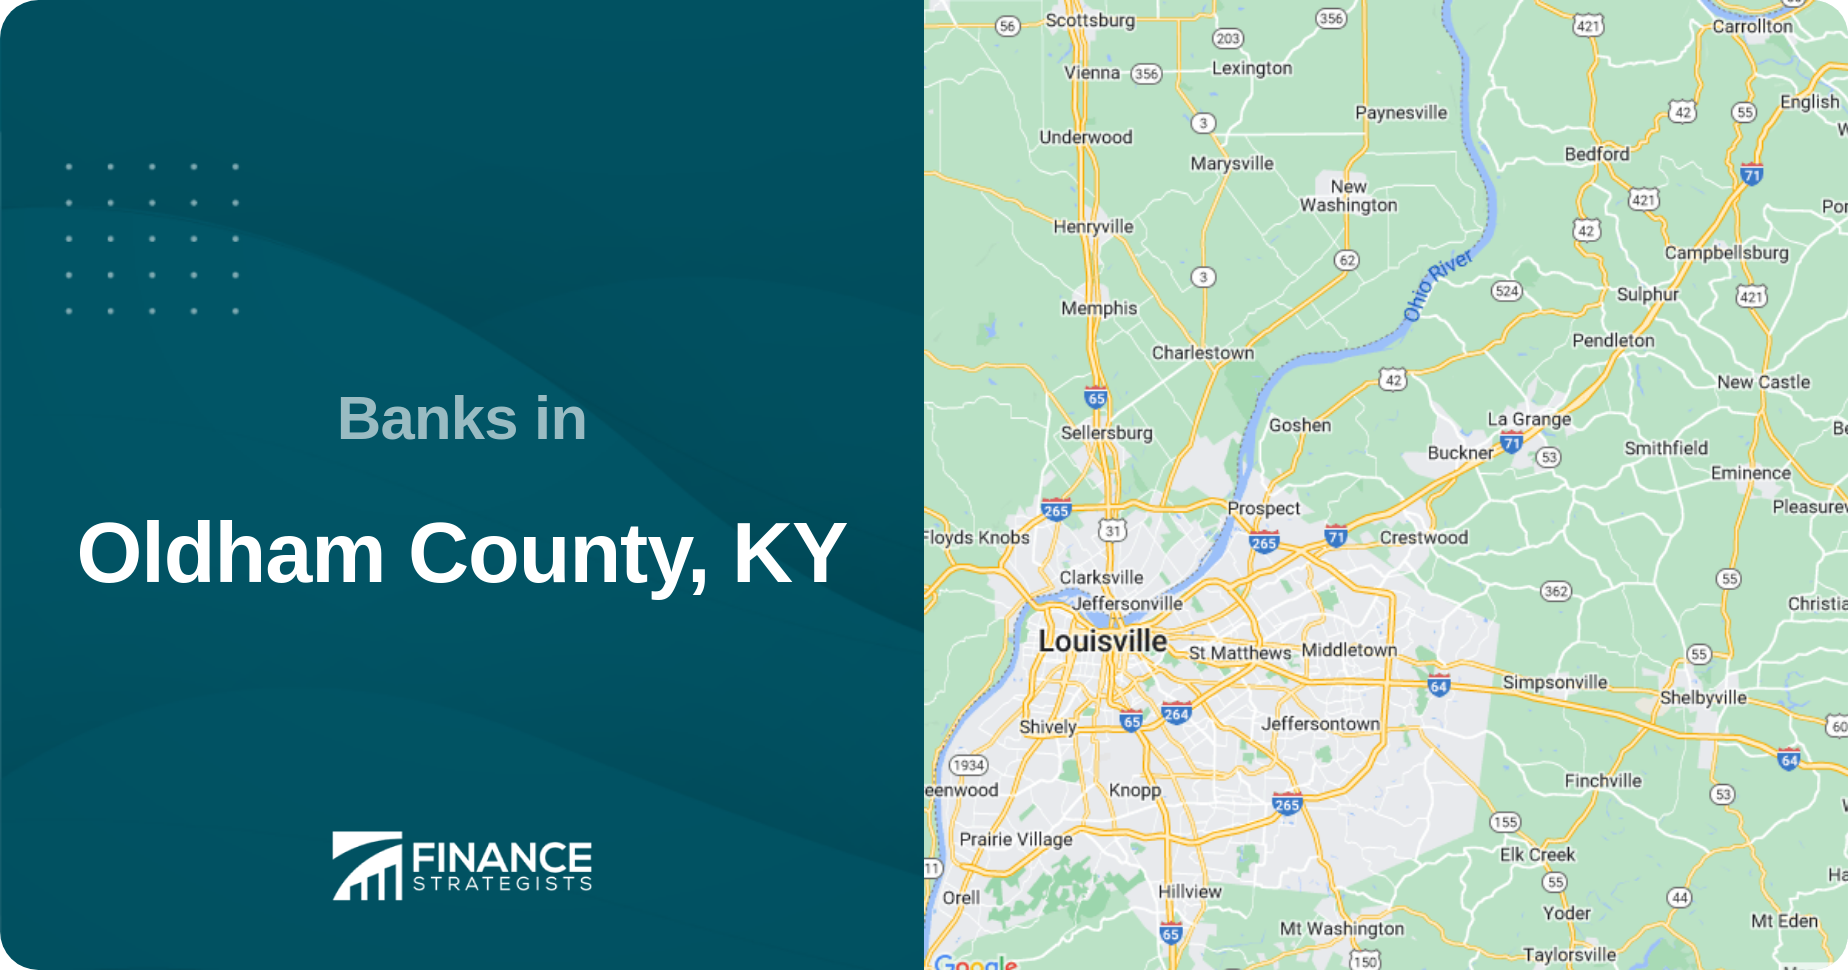 Banks in Oldham County, KY